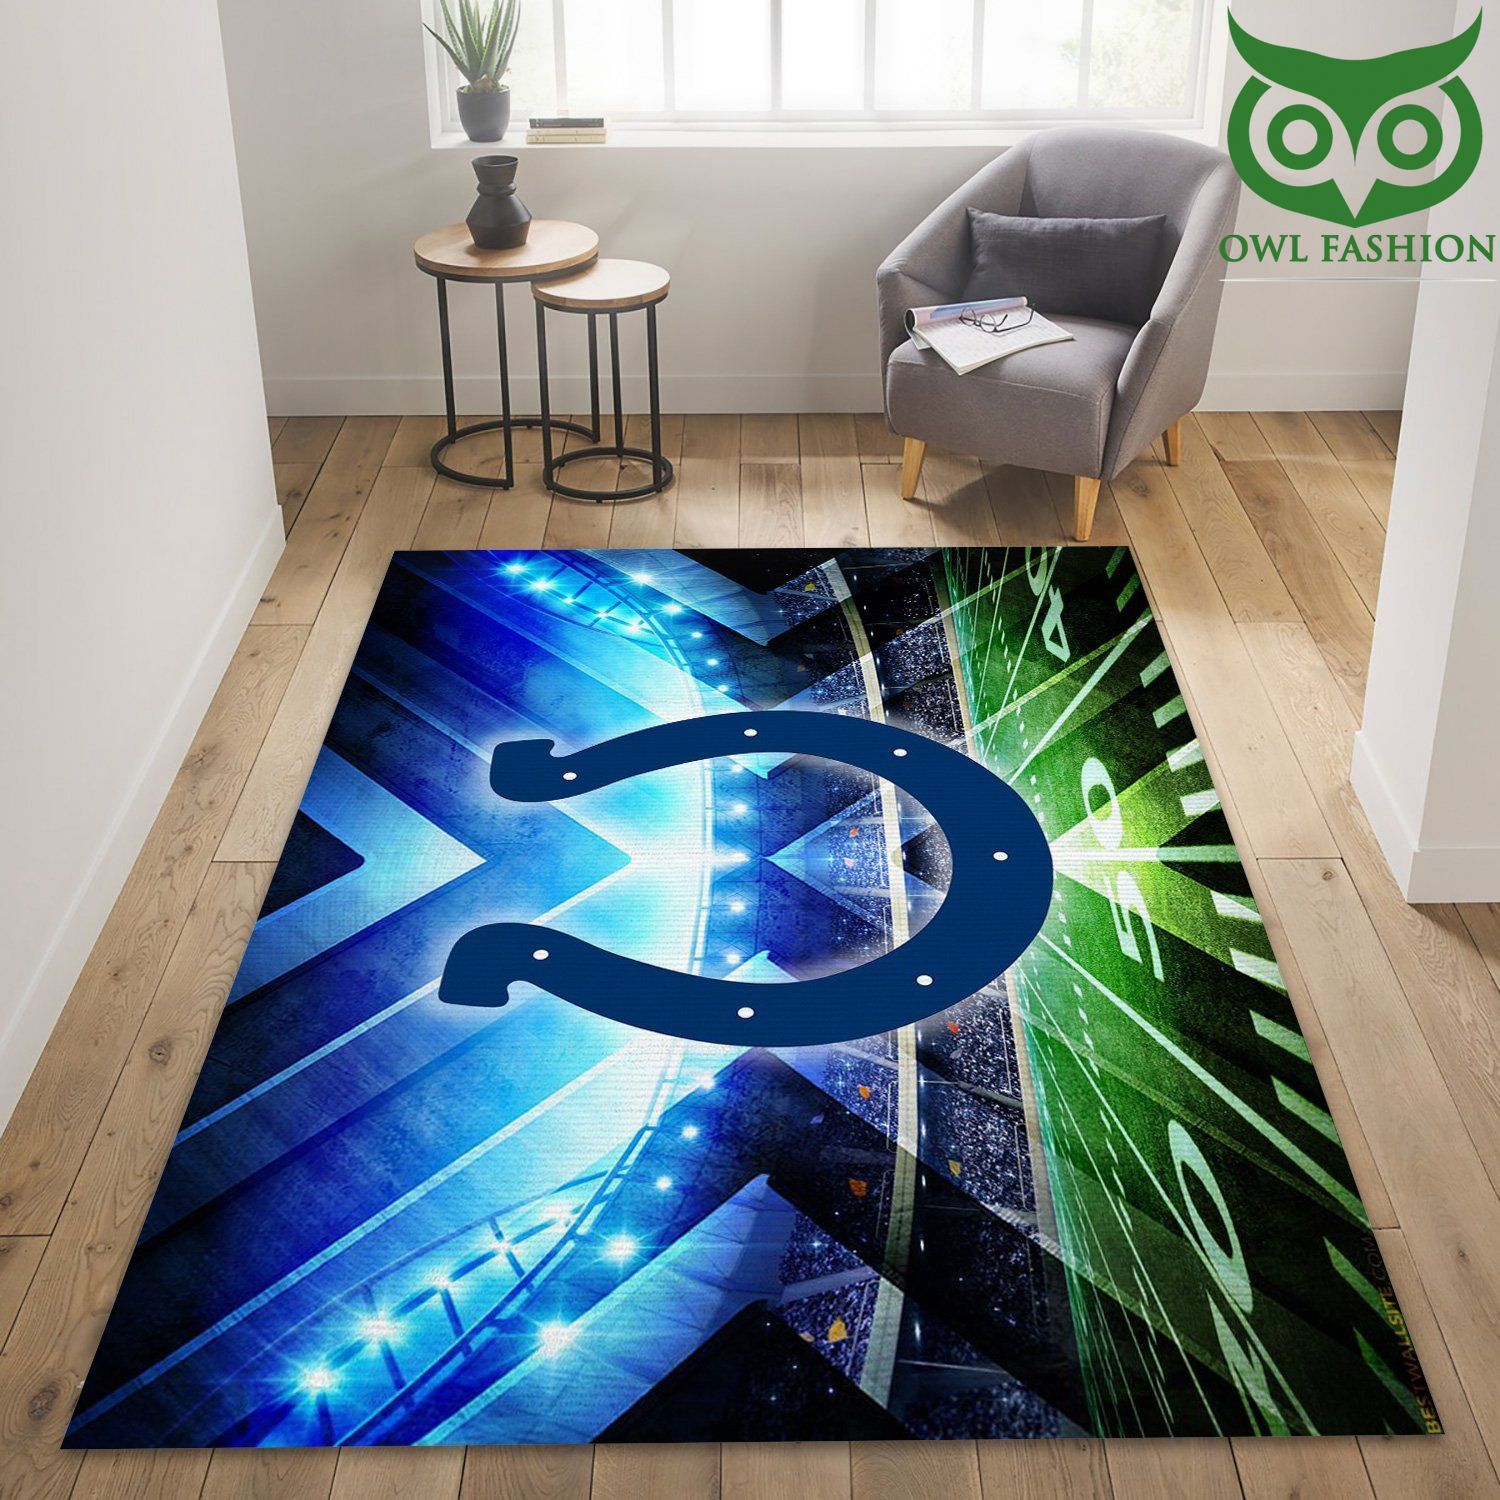 Indianapolis Colts Nfl football room decorate floor carpet rug 